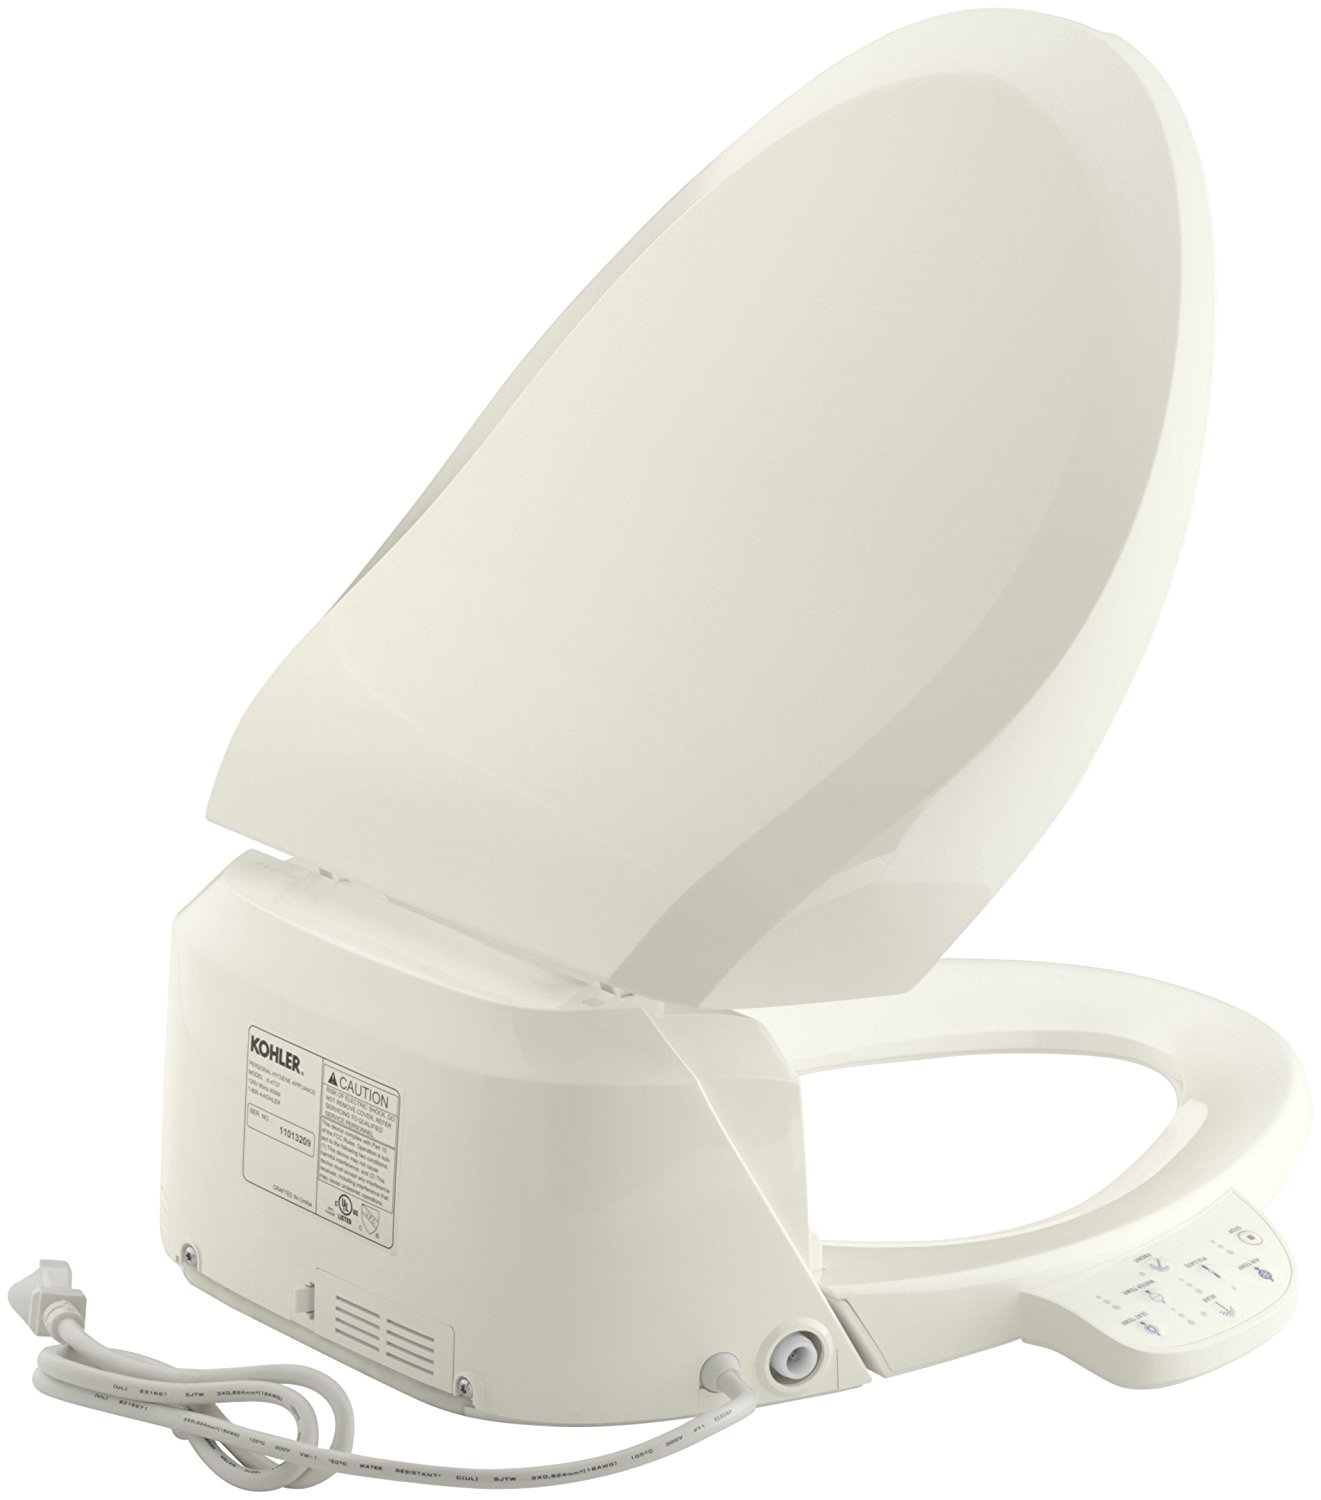 Kohler K-4737-96 C3-125 Elongated Bidet Toilet Seat with Tank Heater and Side Controls, Biscuit